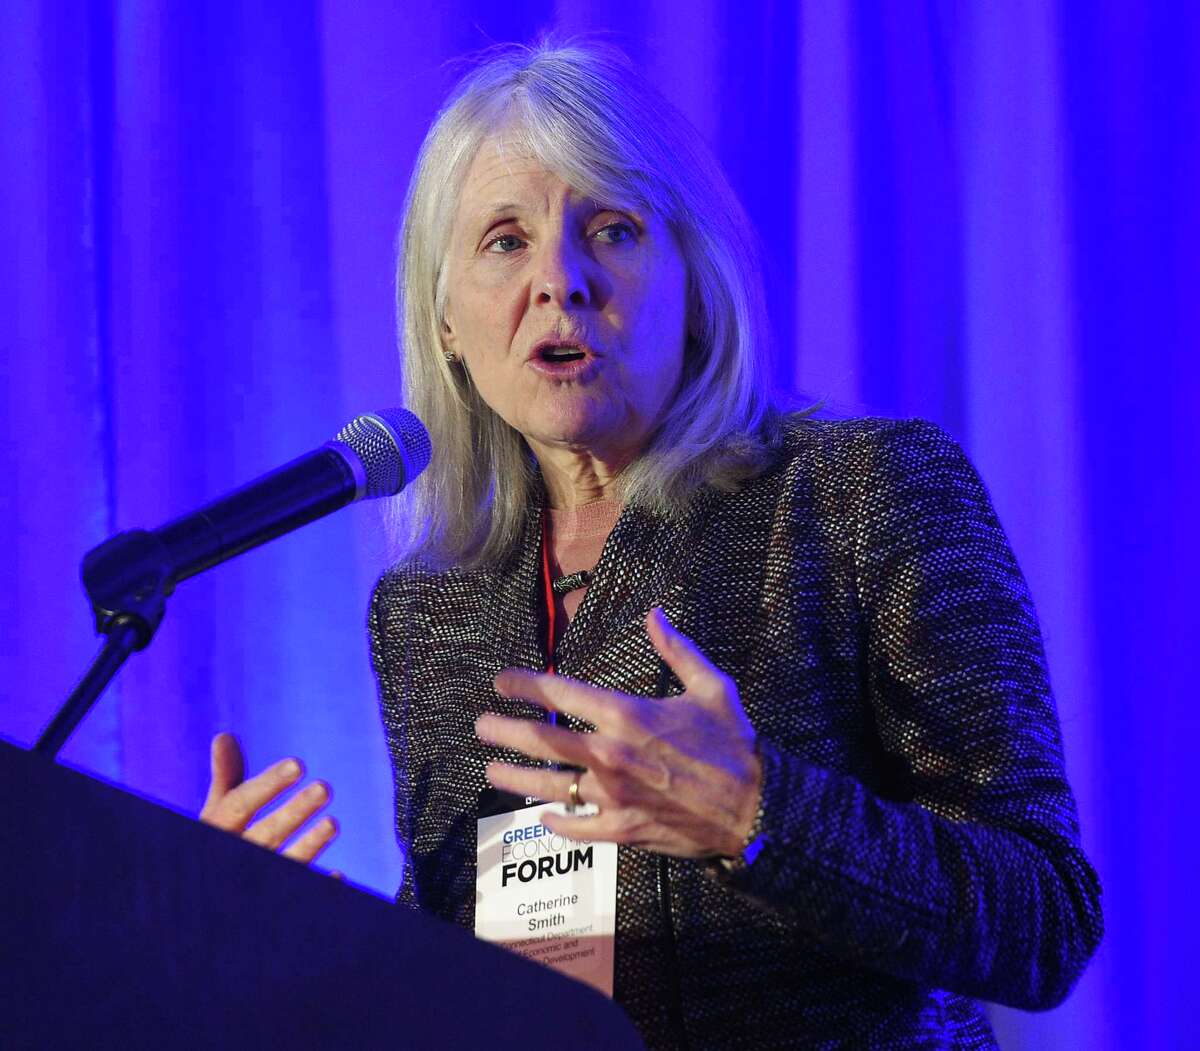 Catherine Smith, commissioner of the Connecticut Department of Economic and Community Development, speaks at the inaugural Greenwich Economic Forum investment conference, at the Delamar Greenwich Harbor, in Greenwich, Conn., on Thursday, Nov. 15, 2018.